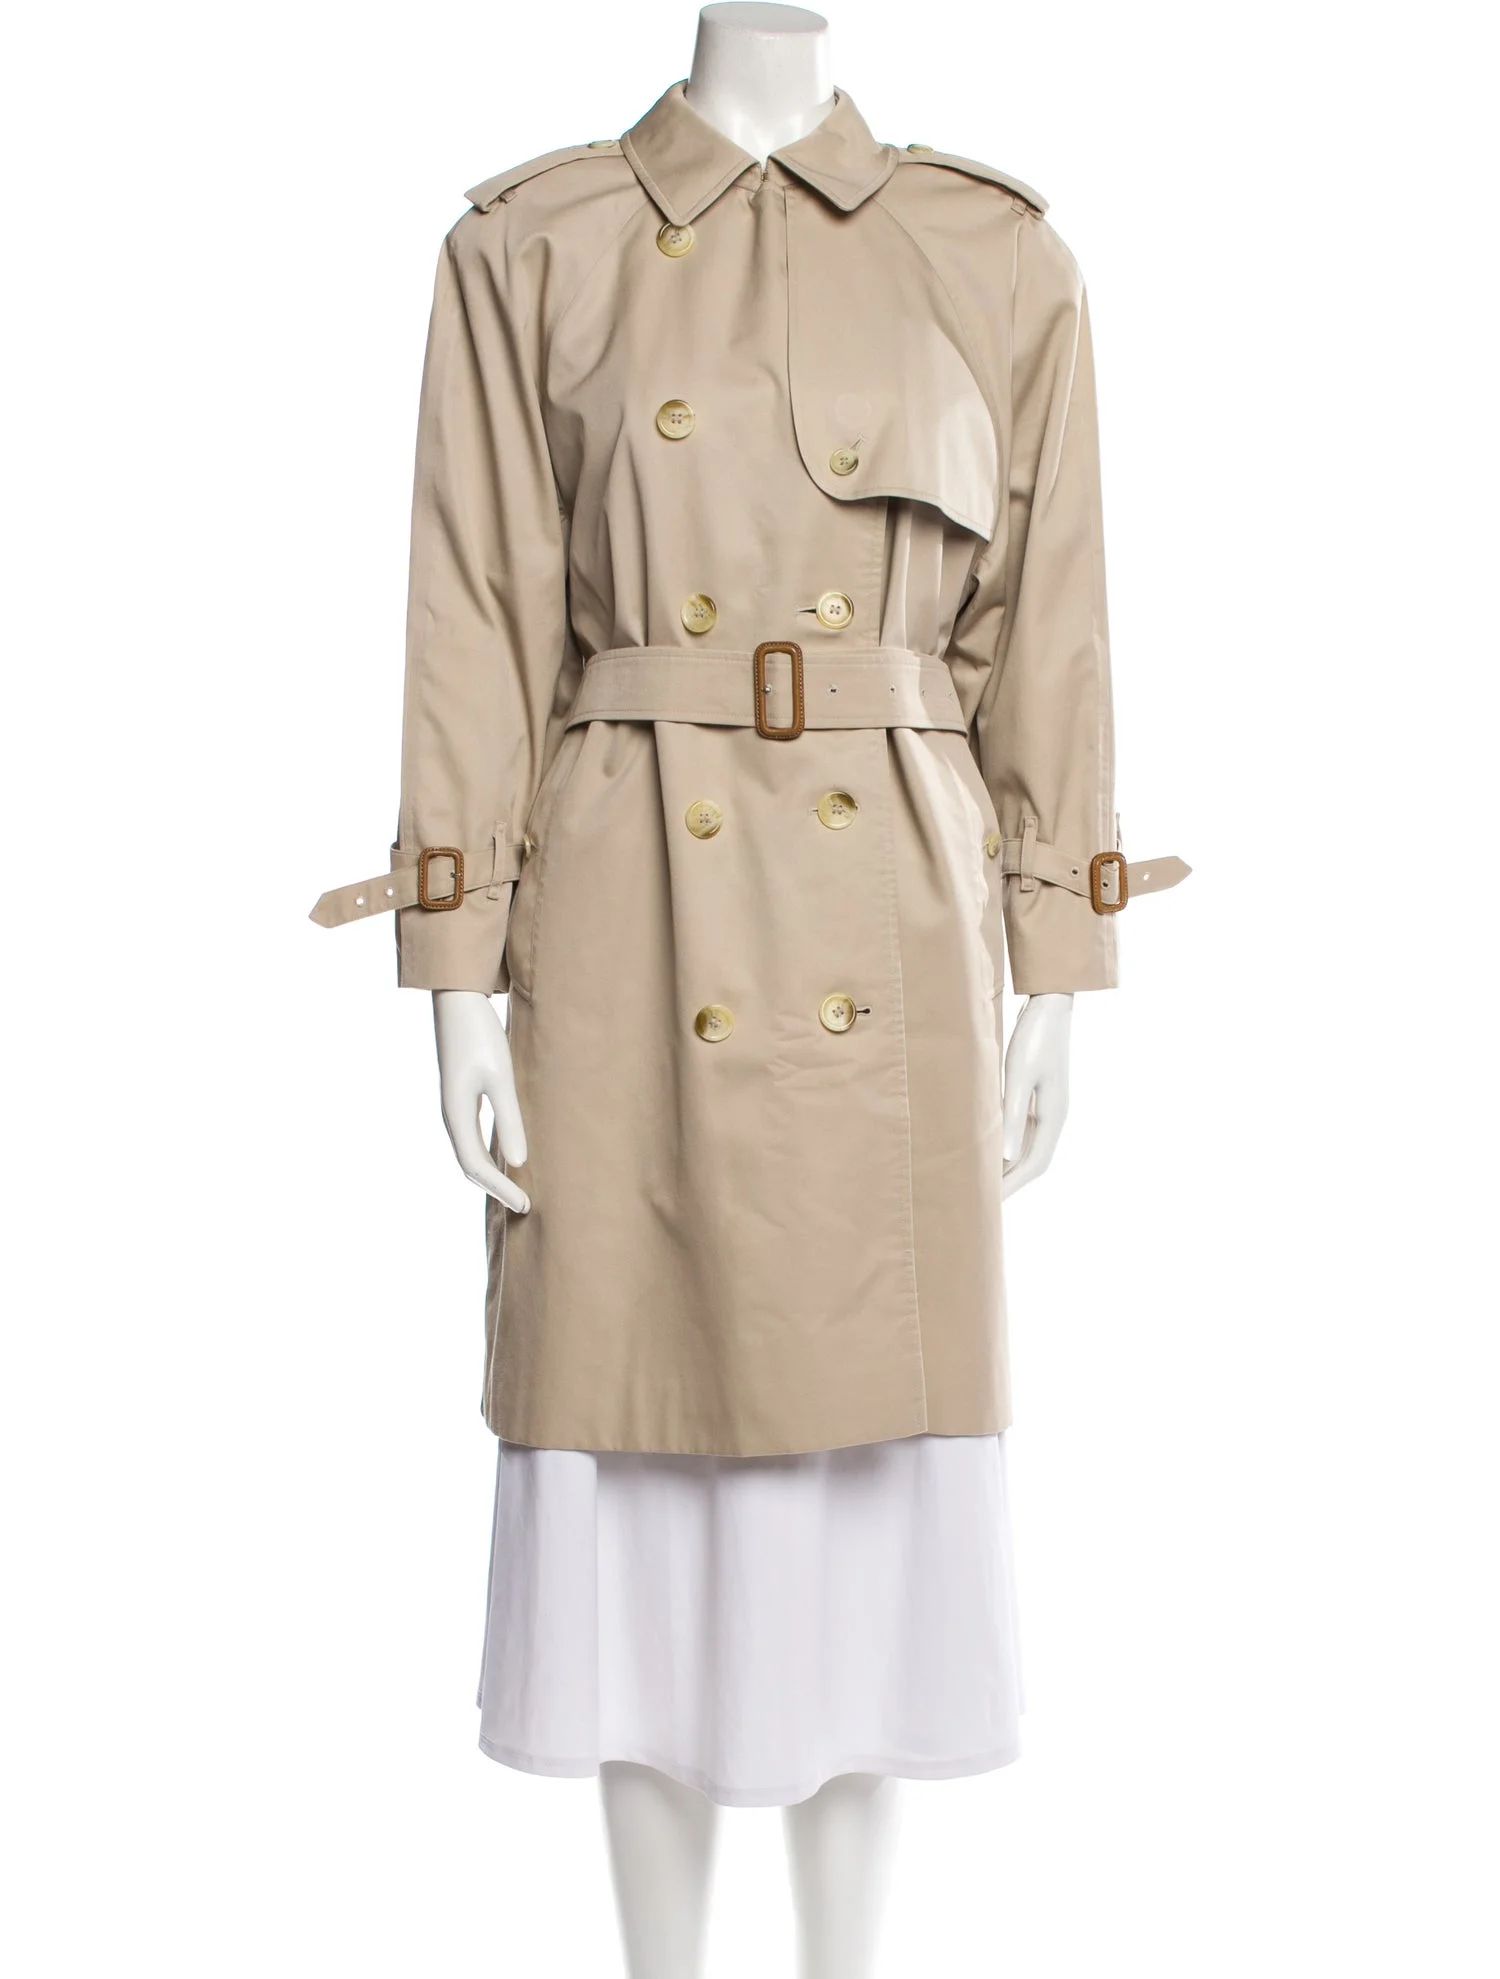 Burberry's Trench Coat | The RealReal